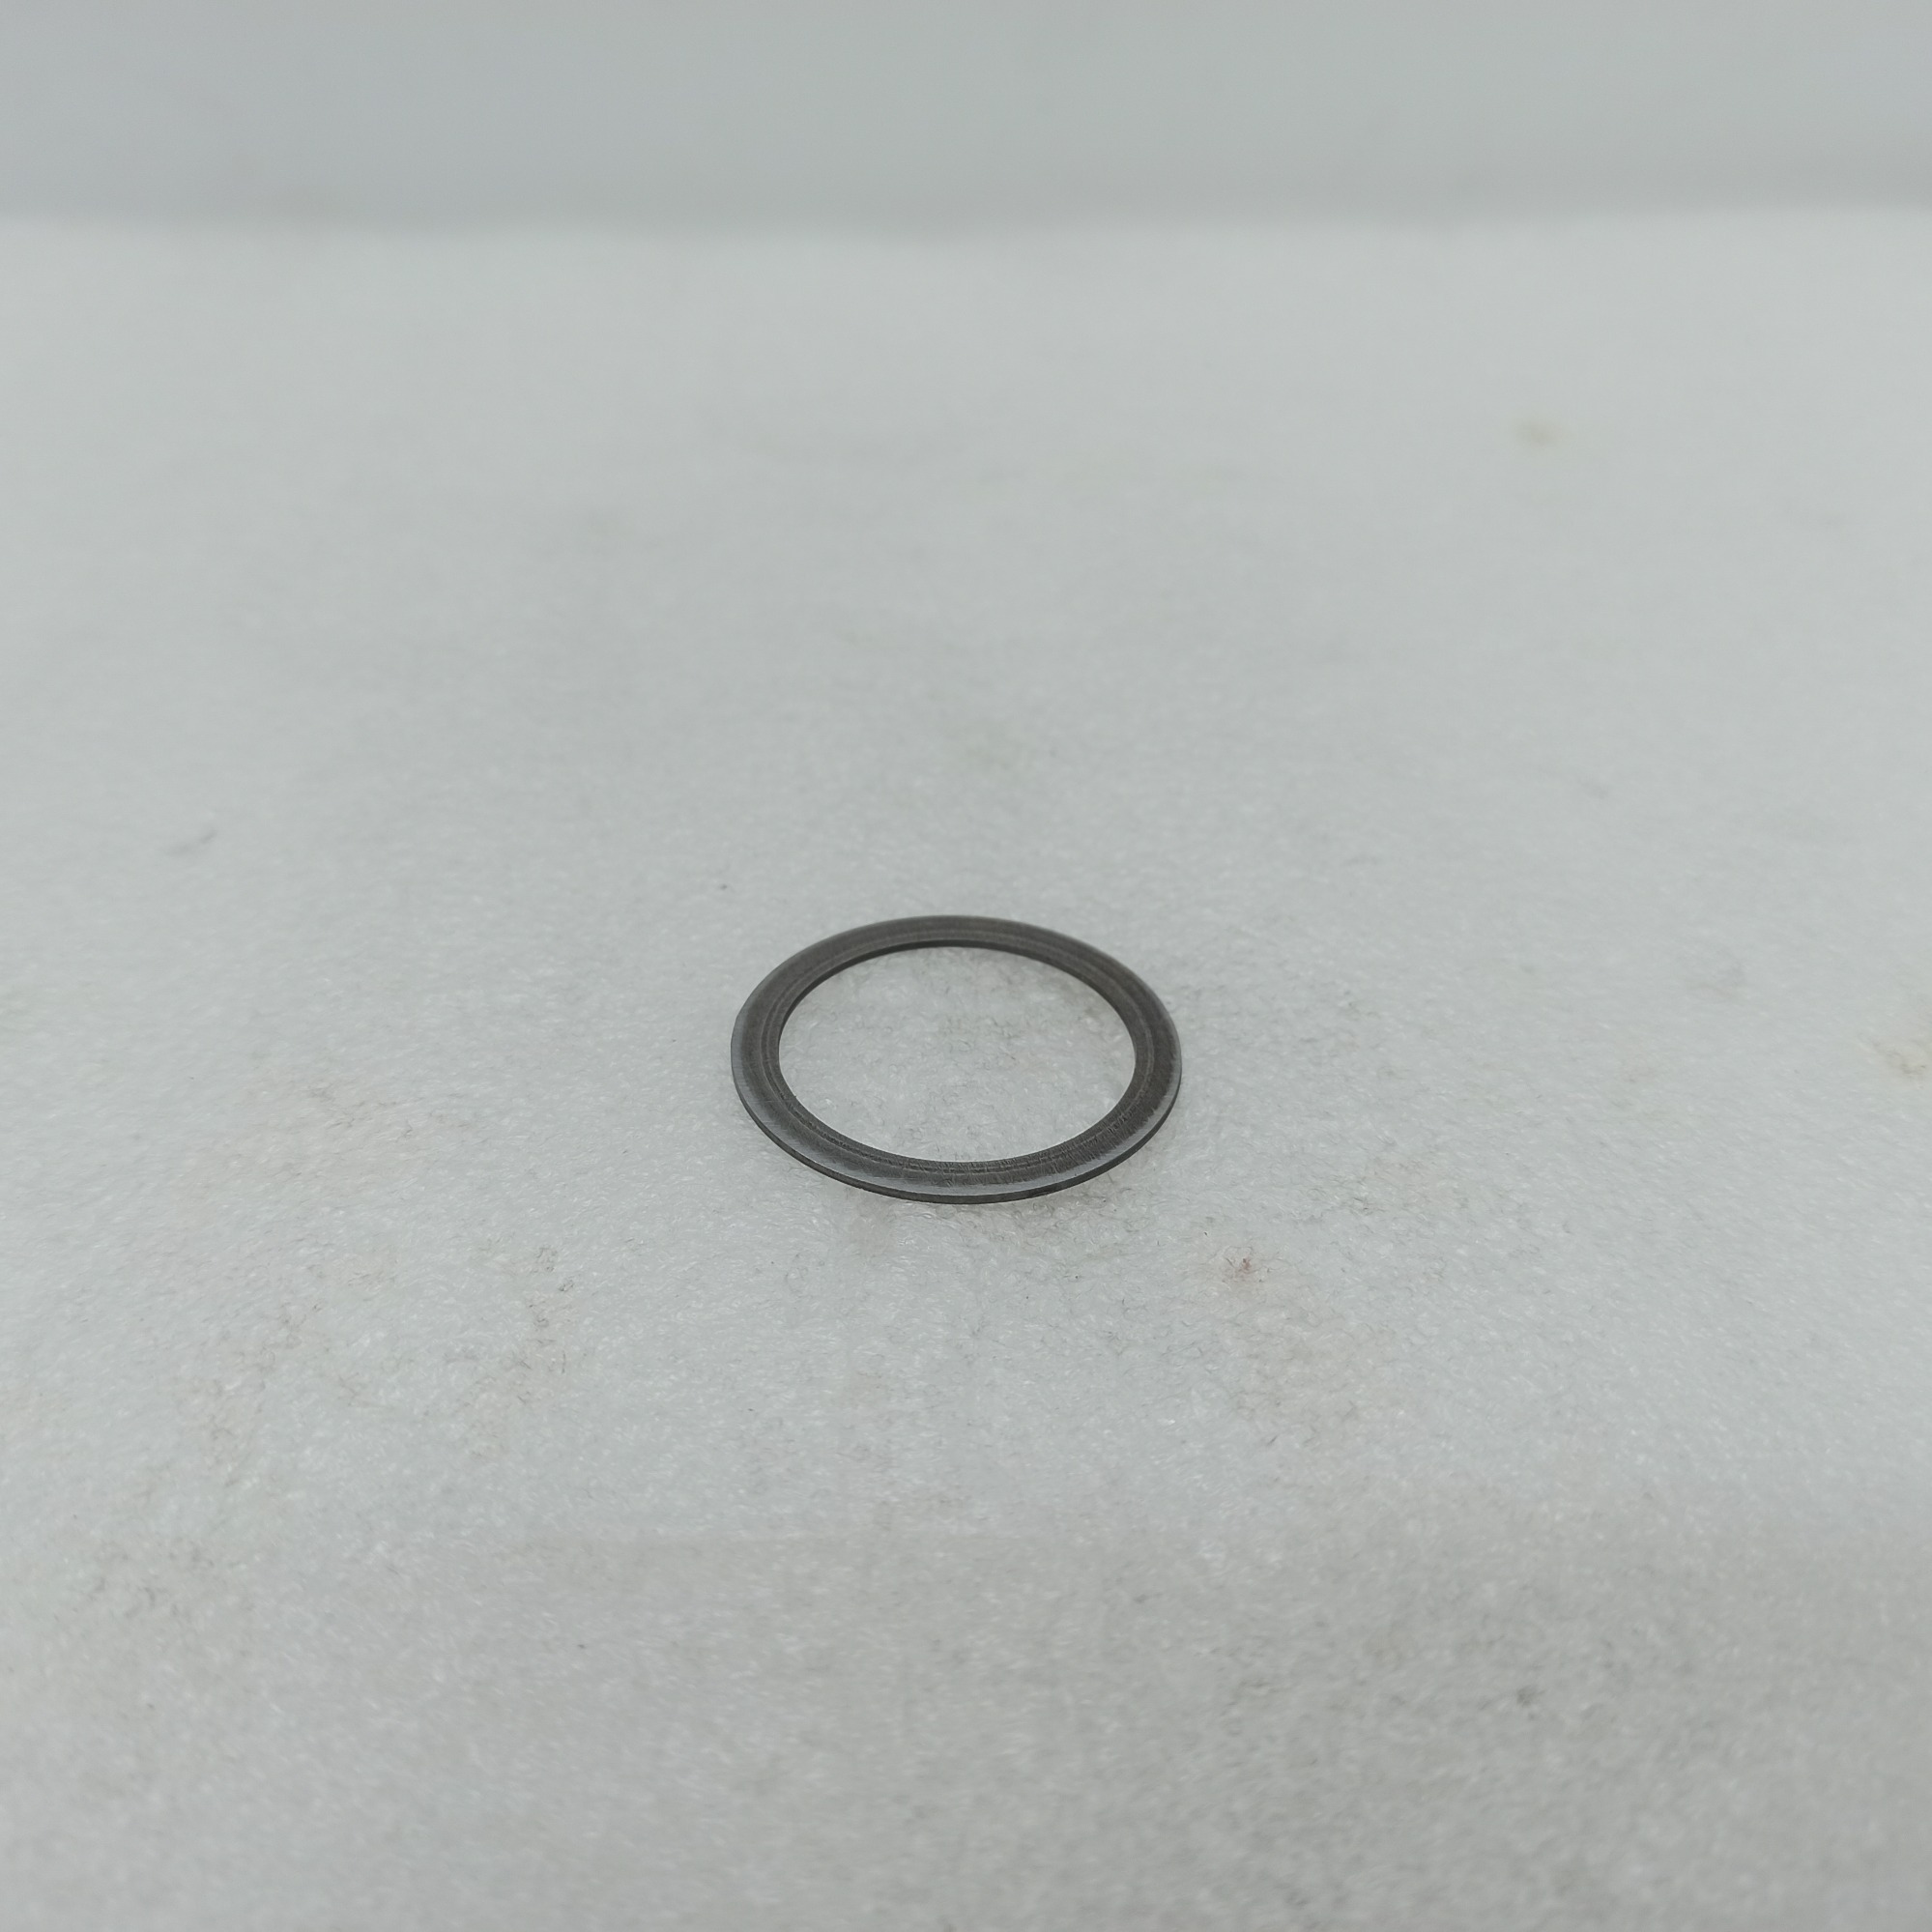 JF015E-0024-U1 JF015E RE0F11A 10-UP /NISSAN CVT INPUT SHAFT BEARING GASKET FIT ON CASE AND 38.65 OUTER DIAMETER